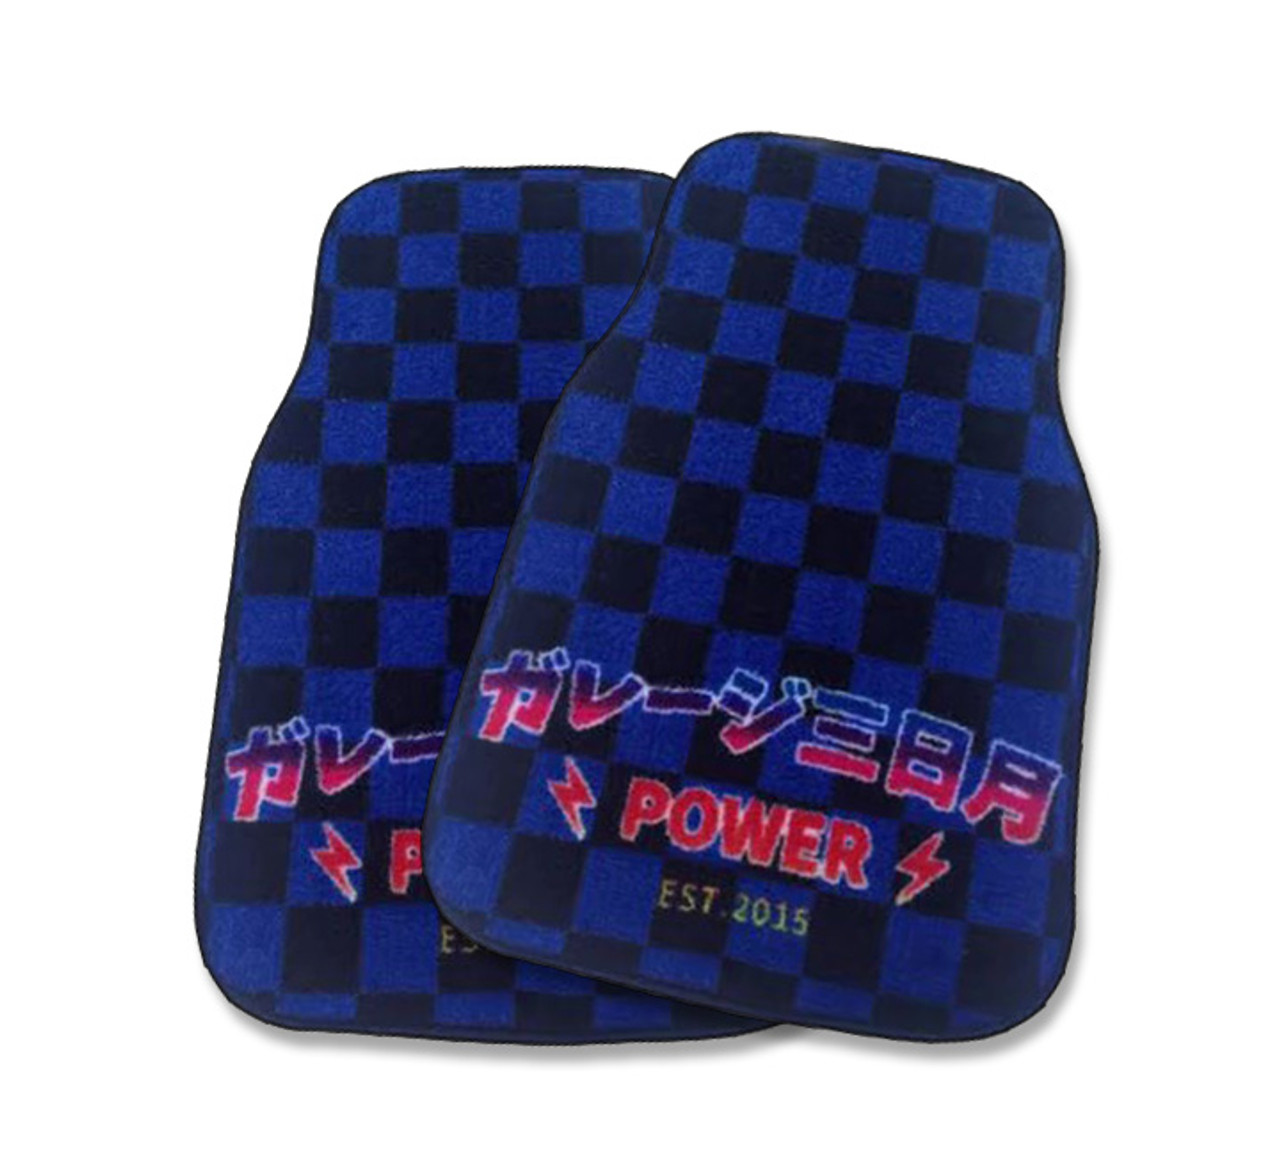 Jdm Car Floor Mats / Jdm Checkered Car Mats - Available in clear vinyl or carpet.